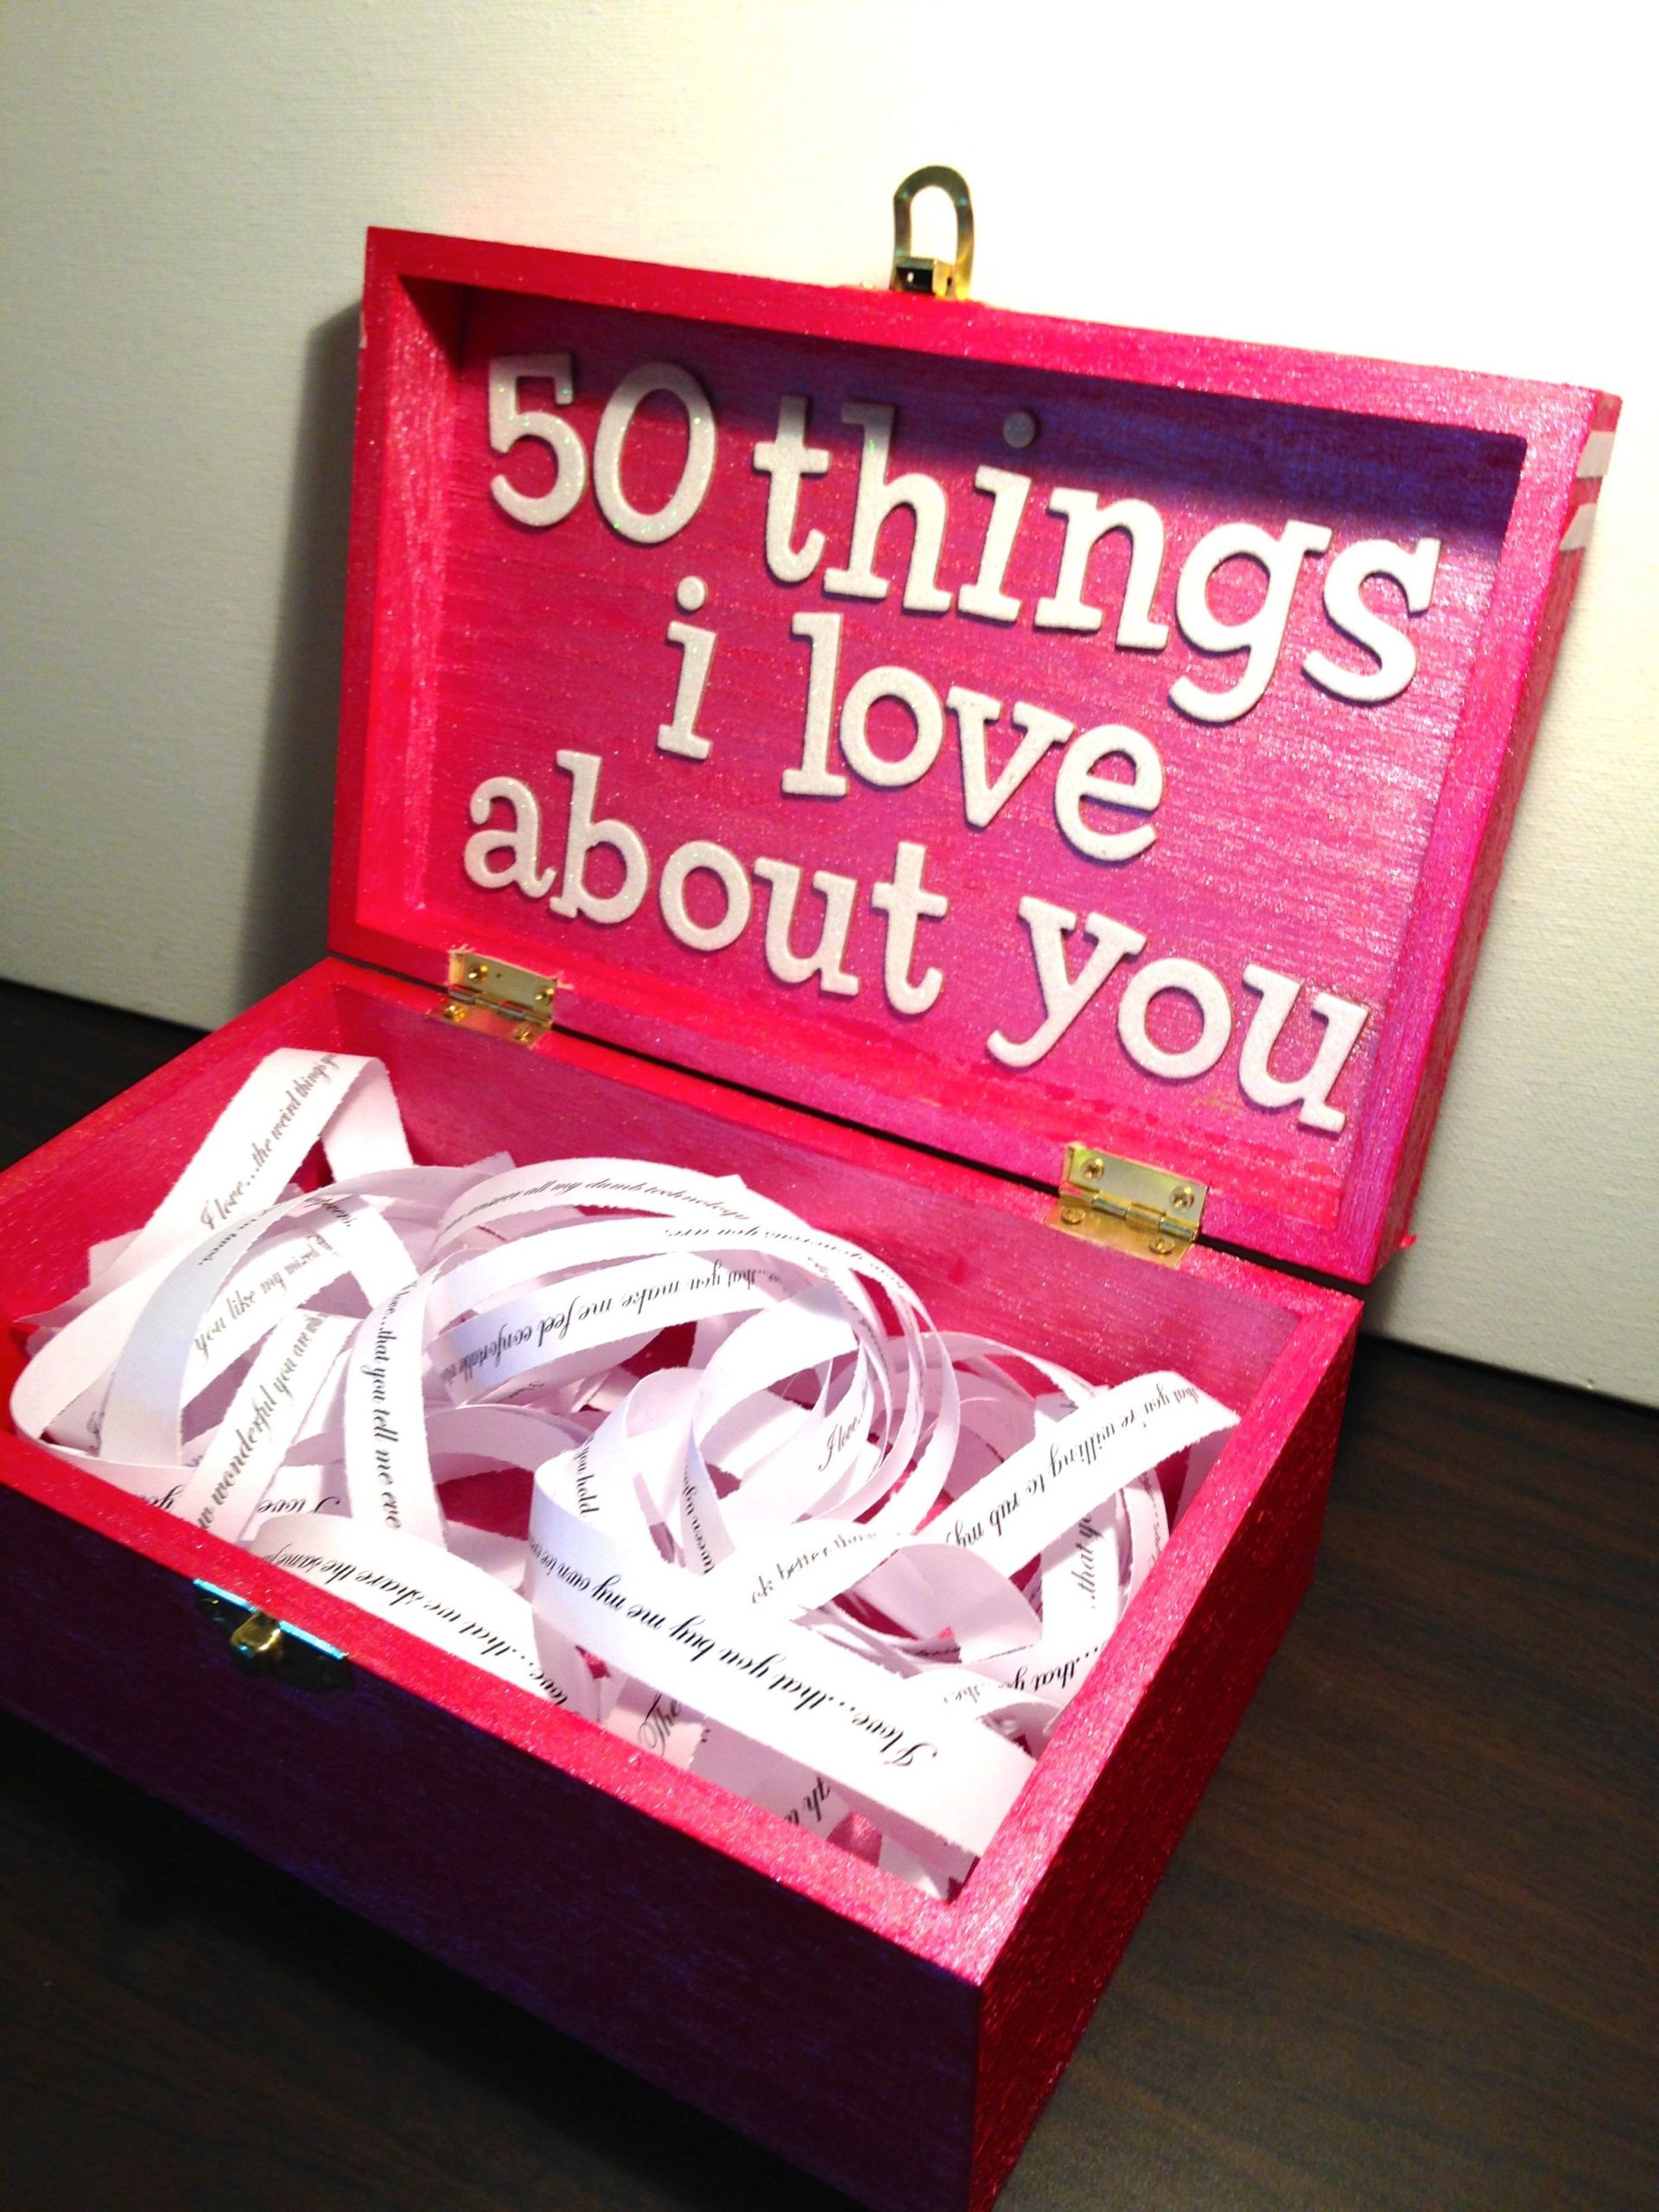 Gift Ideas To Make For Girlfriend
 Boyfriend Girlfriend t ideas for birthday valentine s or just a random t A box with 50